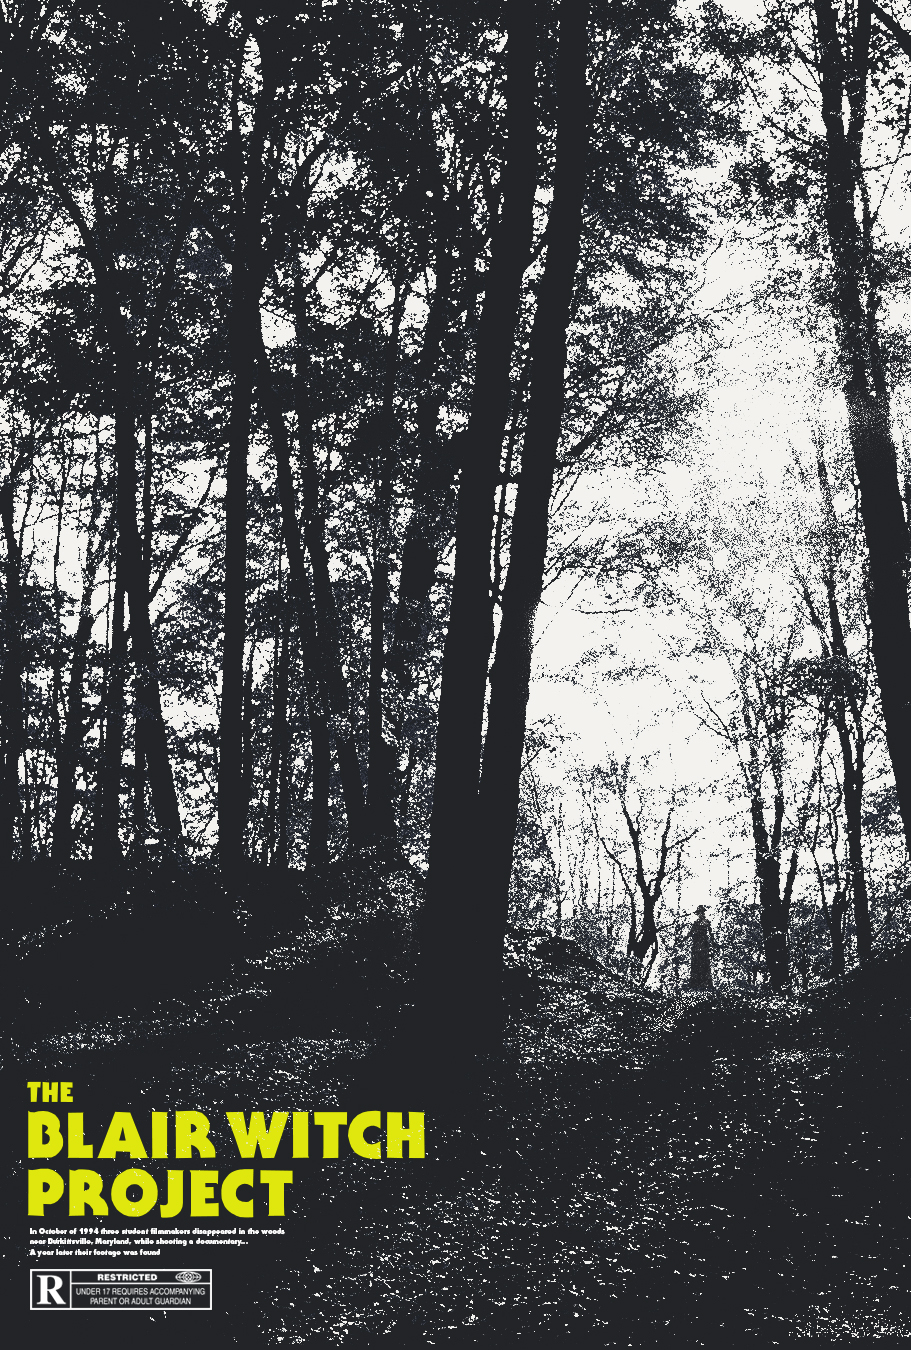 Digital Poster_BlairWitchProject.jpg